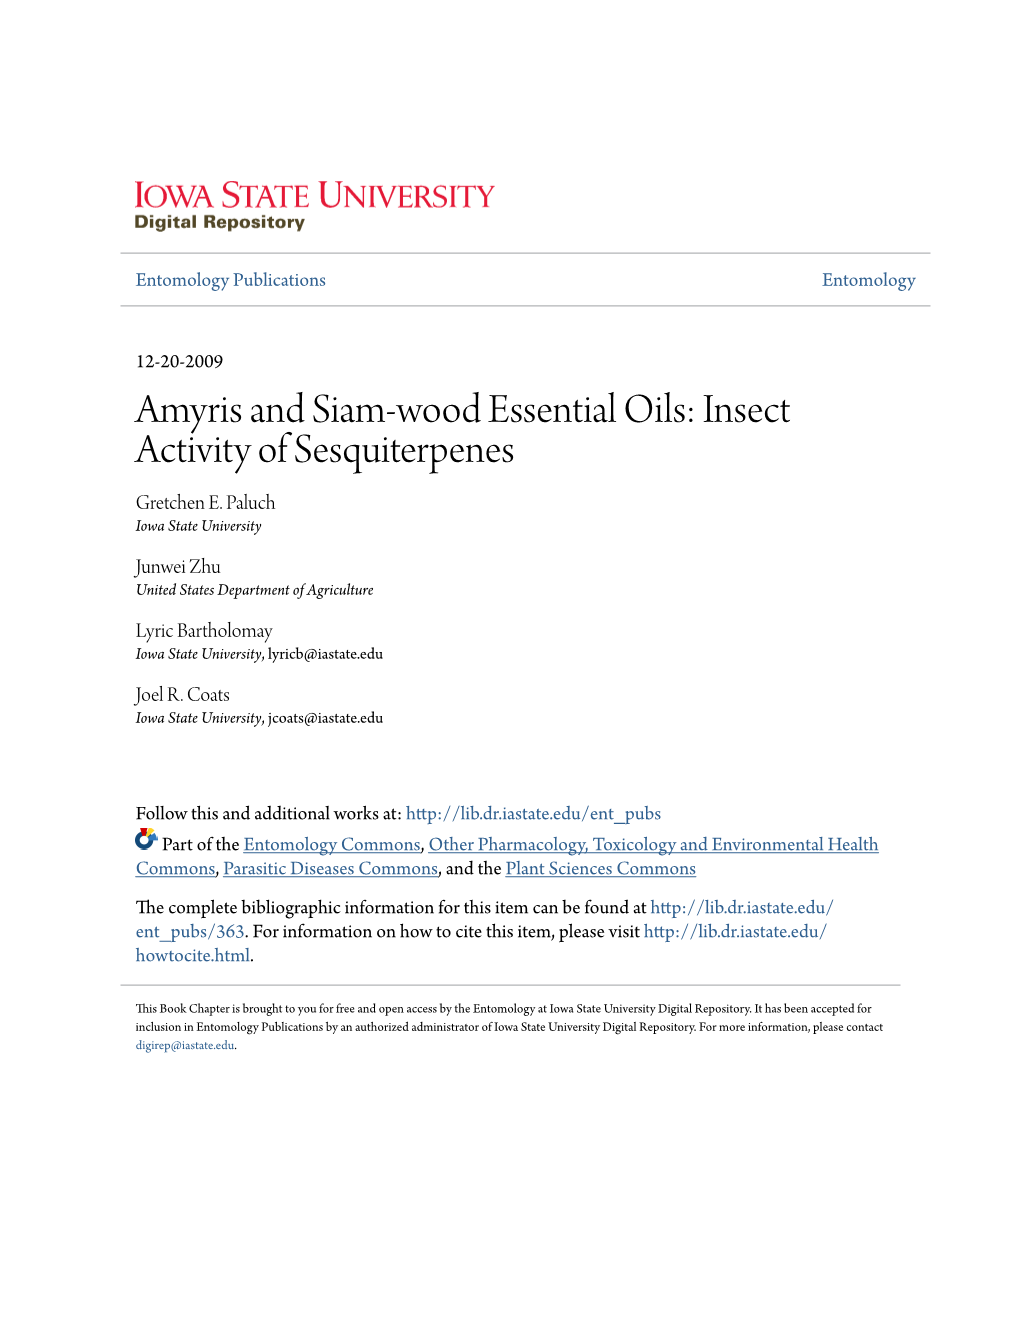 Amyris and Siam-Wood Essential Oils: Insect Activity of Sesquiterpenes Gretchen E